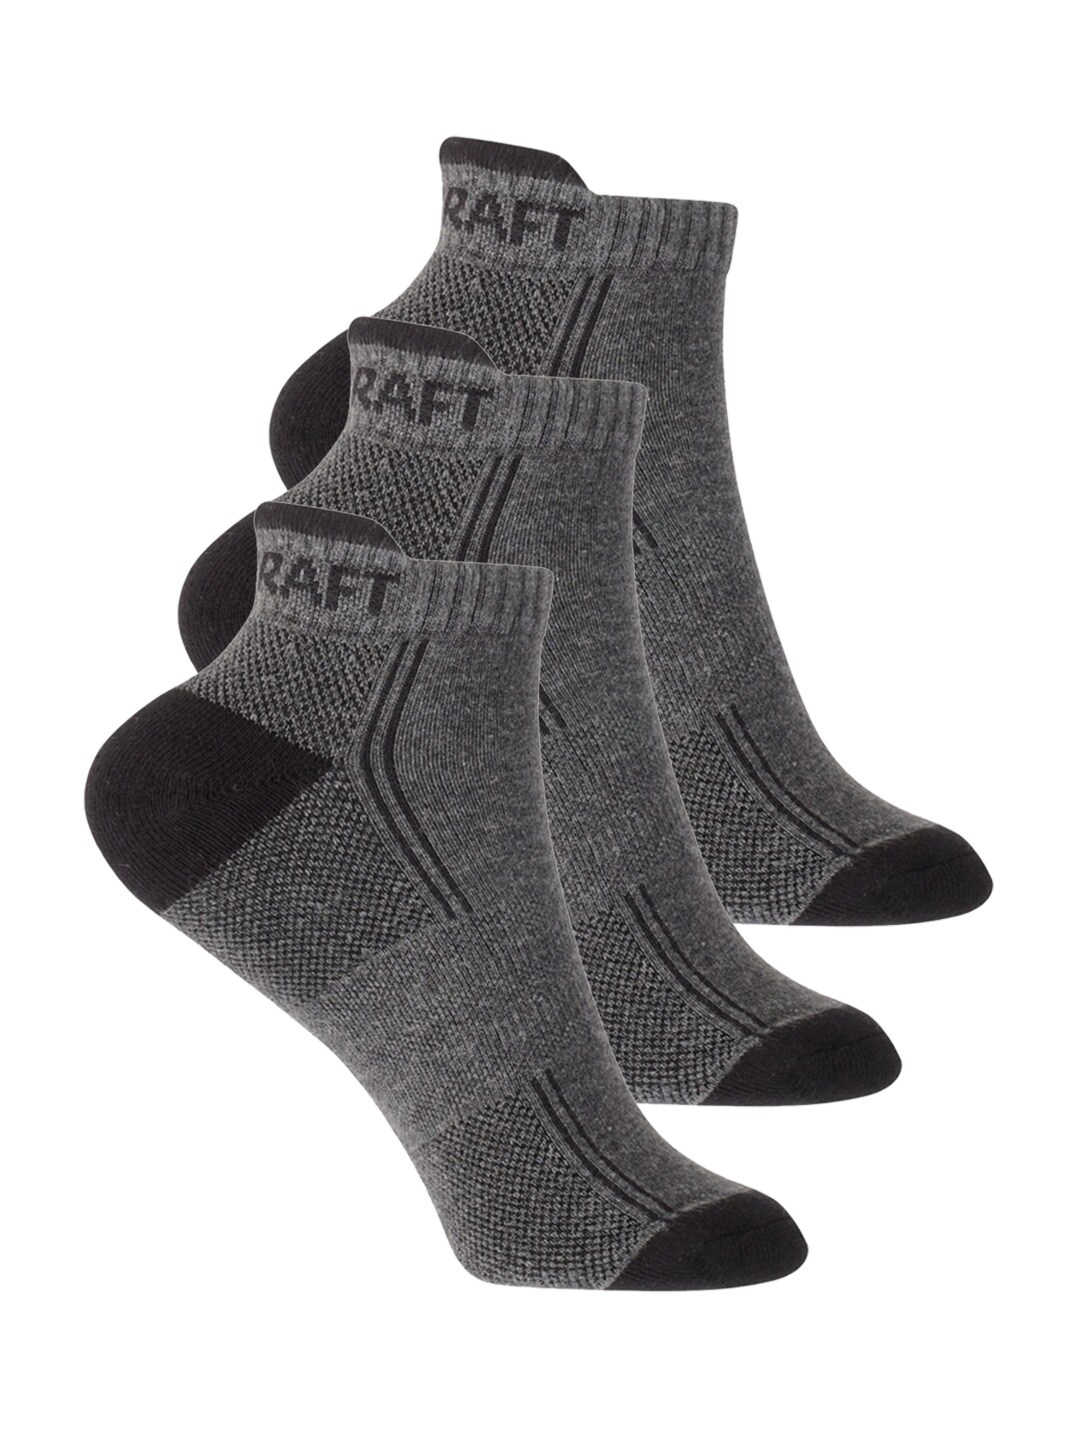 Wildcraft Adults Grey & Black Pack of 3 Colourblocked Ankle Length Socks Price in India